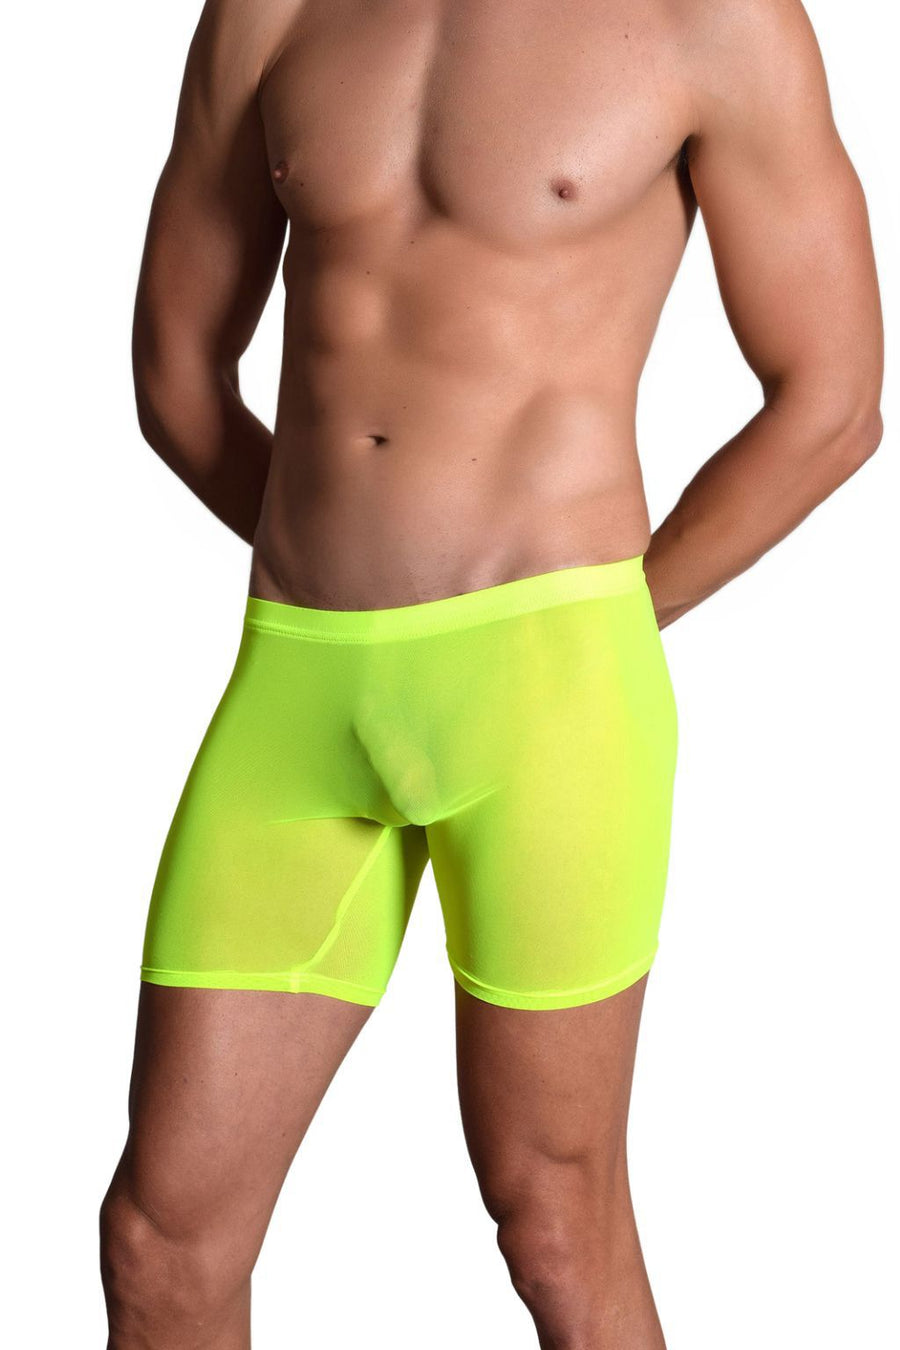 Bodywear for Men Ultra Sheer High Waist Boxer Shorts #BfM-1042 made from a fine poly blend sheer material. Our Sheer Boxer shorts sit high on your waist, 4' long legs, seamless front with a center seamed rear in Neon Green